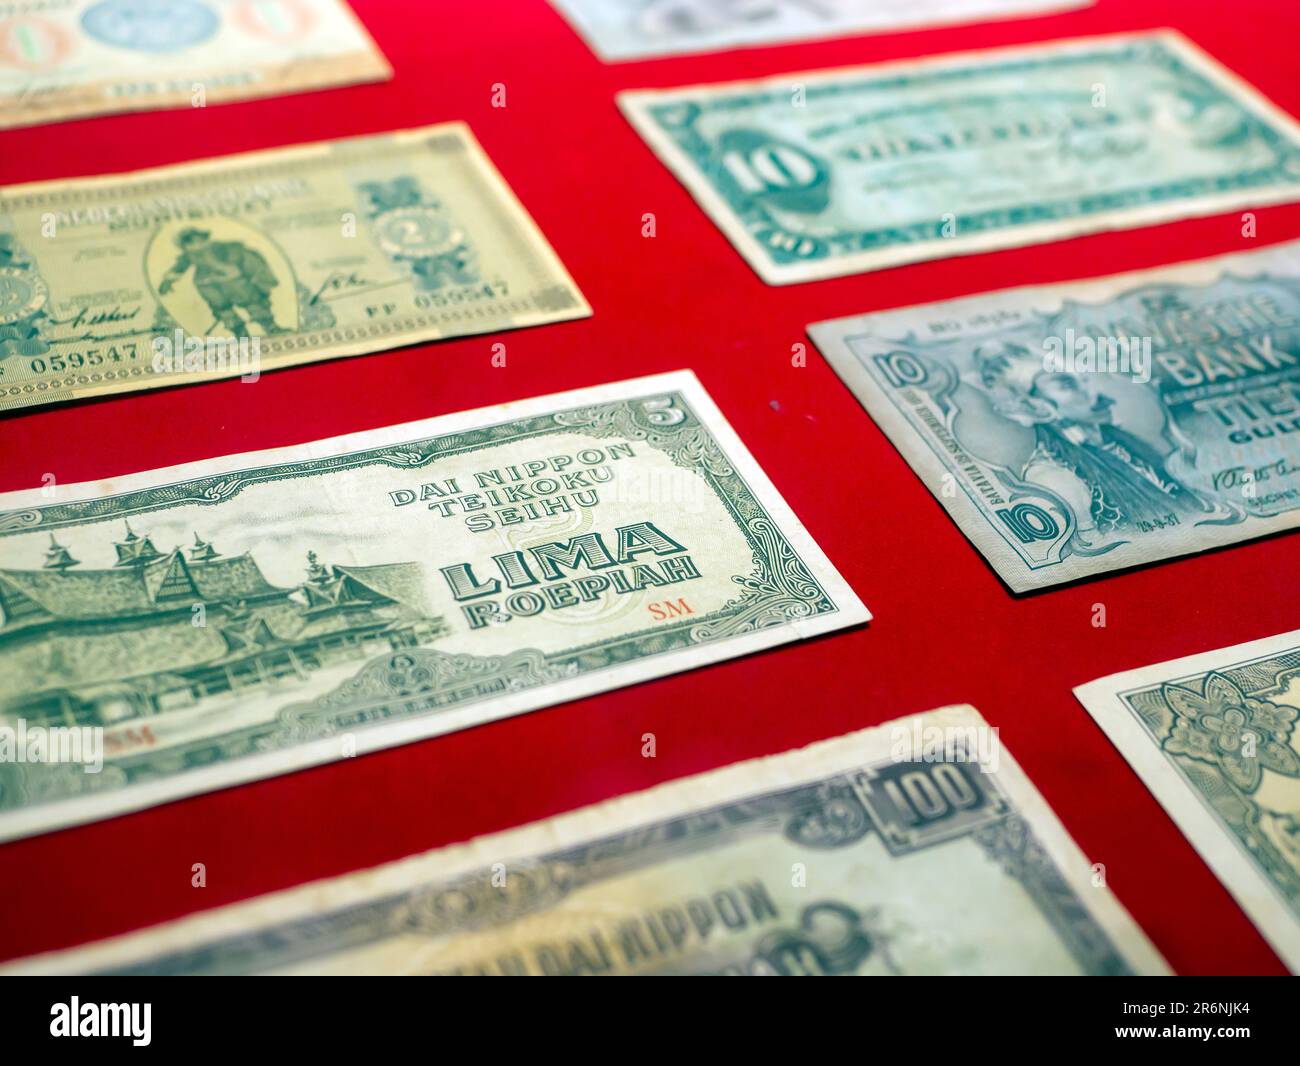 Close up view of old Indonesian banknotes. Old rupiah currency, money concept. Selected focus. Stock Photo